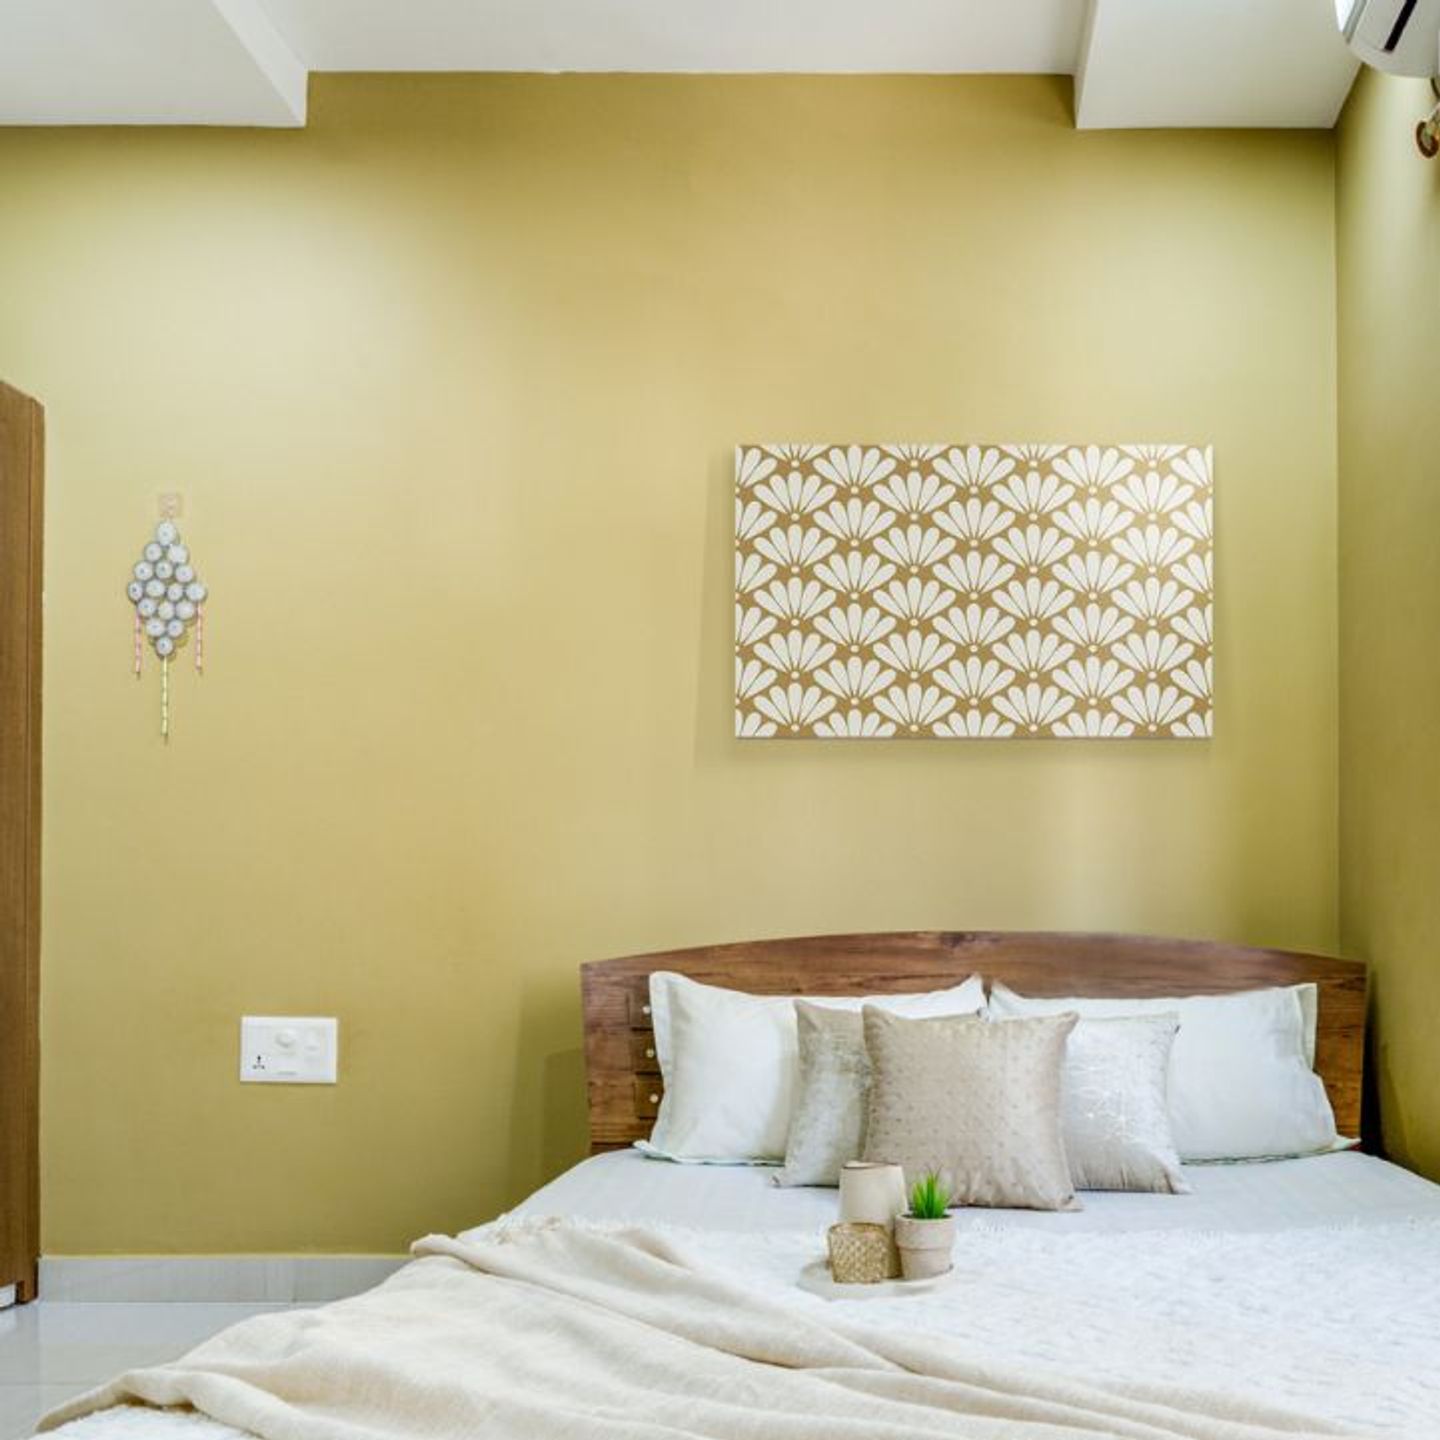 Olive Green Wall Paint Design For Bedrooms - Livspace